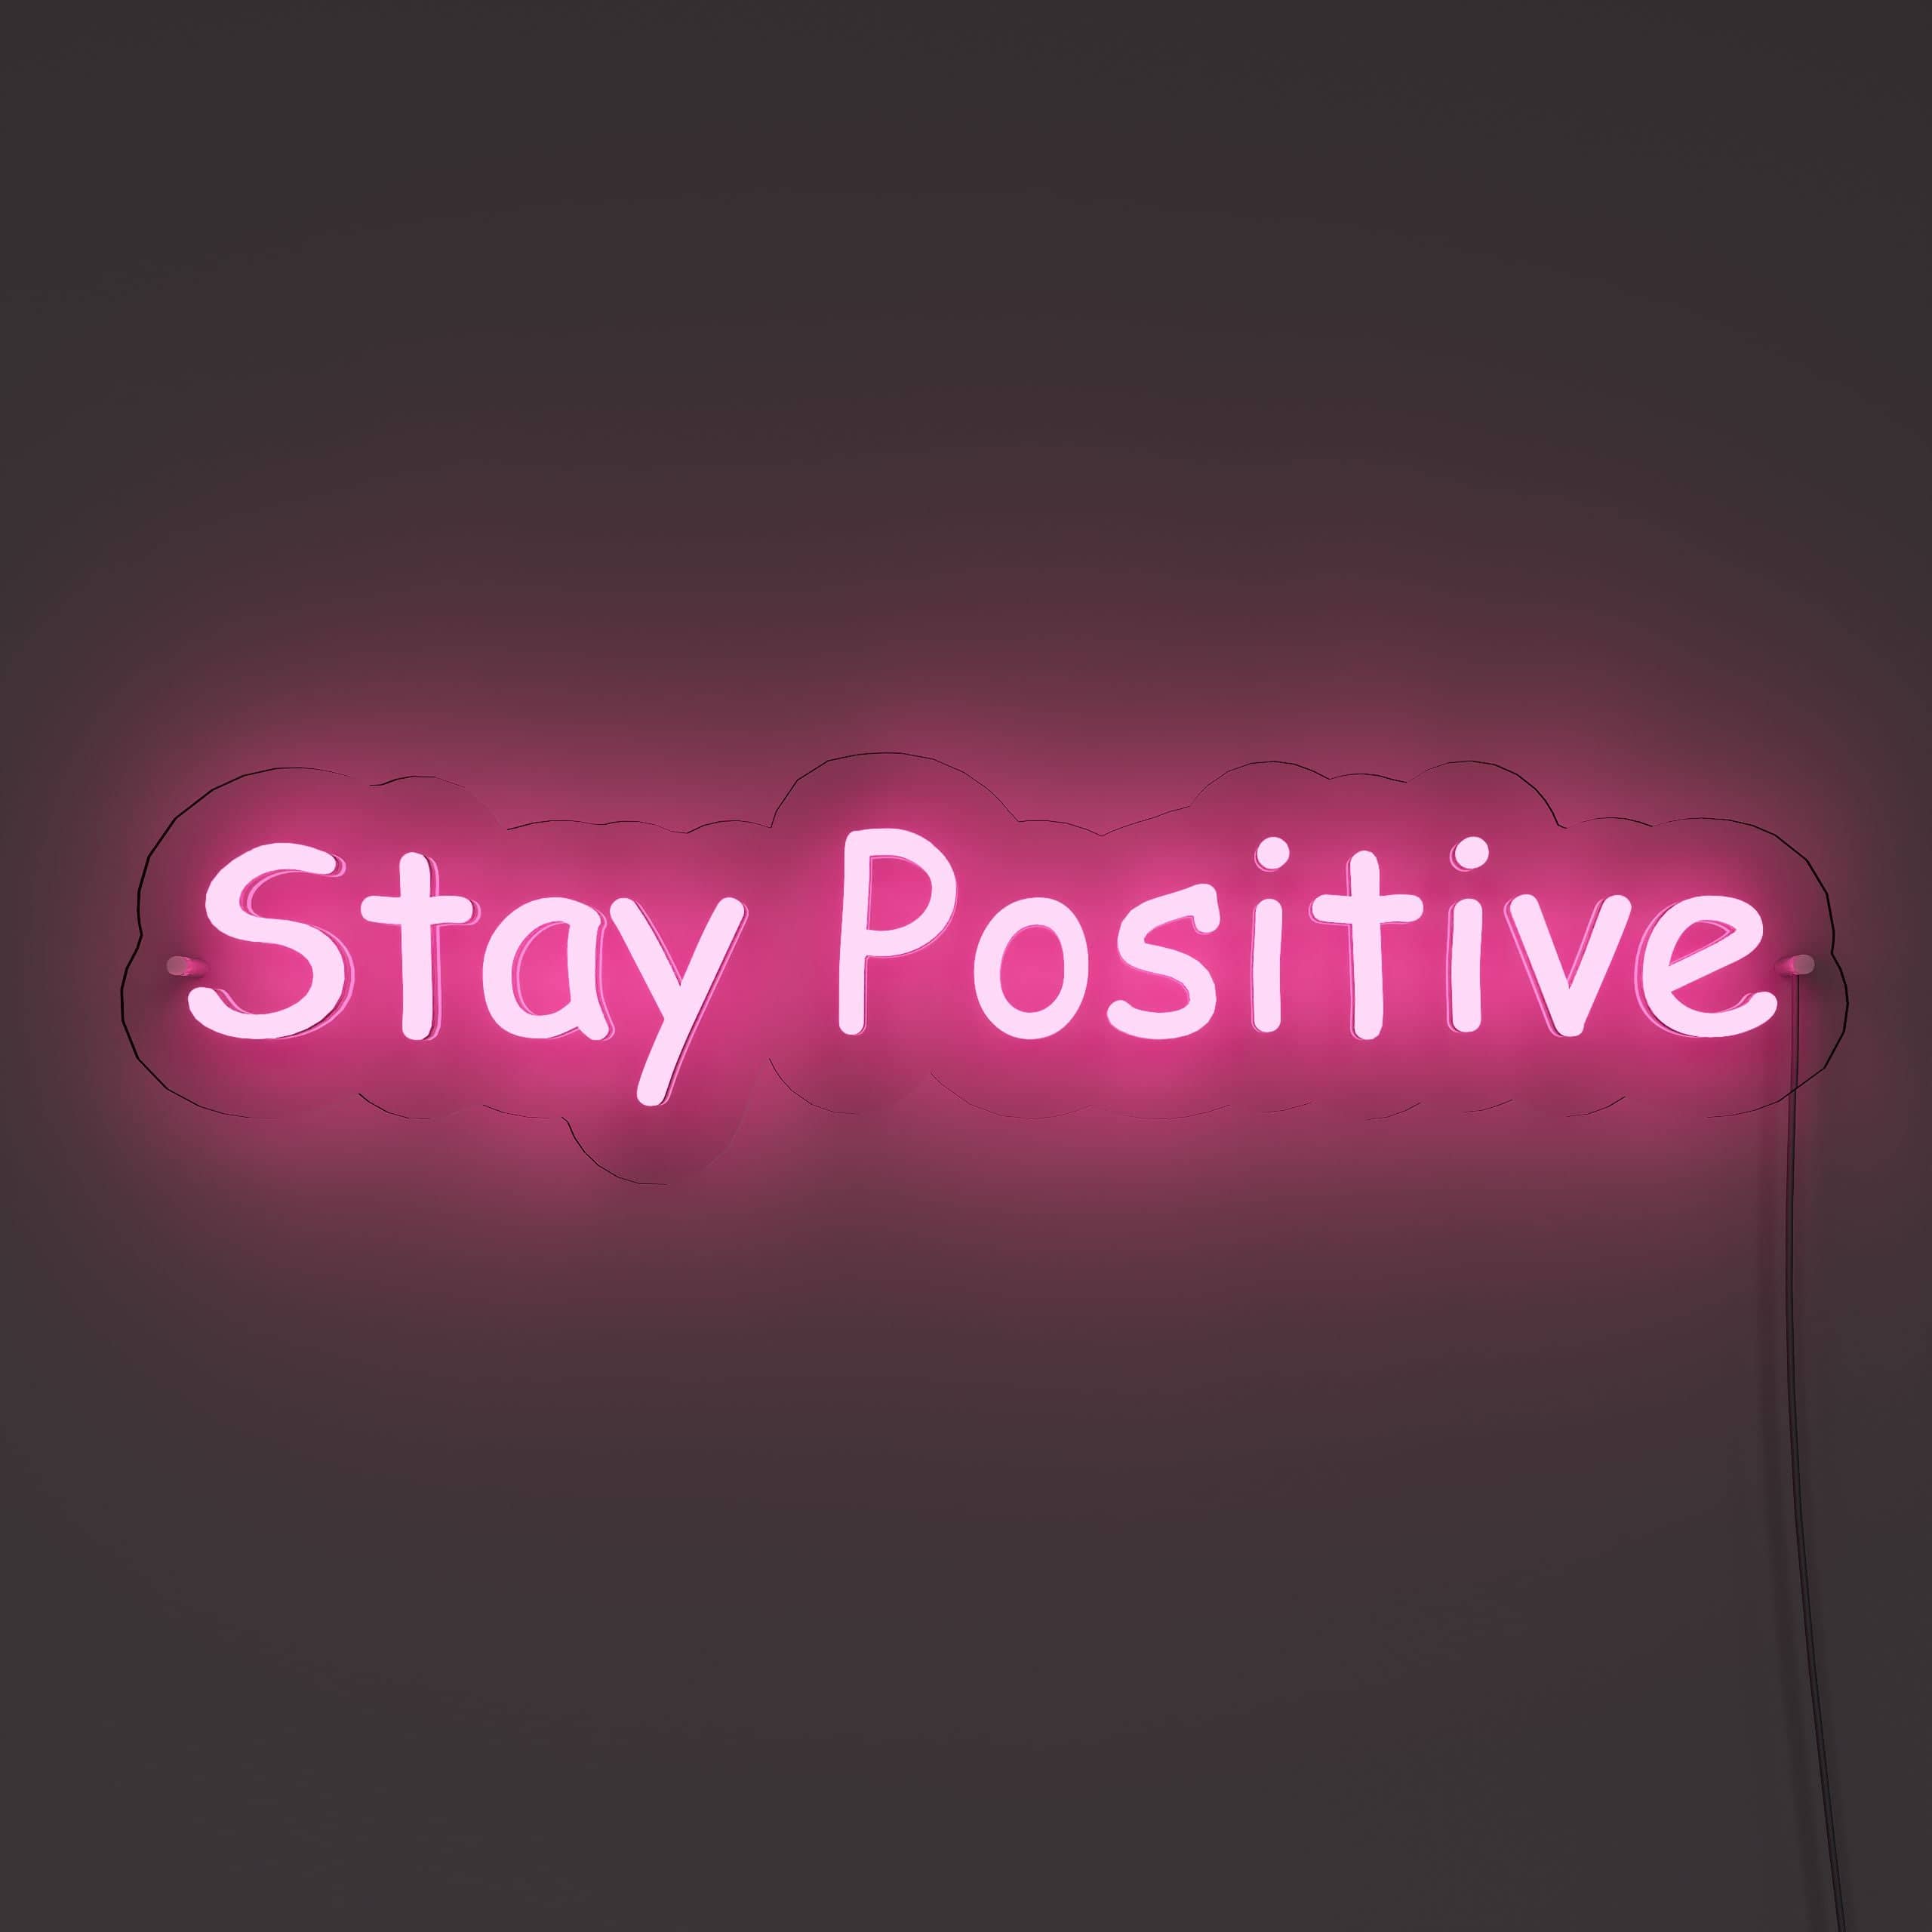 embody-positive-vibes,-spread-goodness-neon-sign-lite